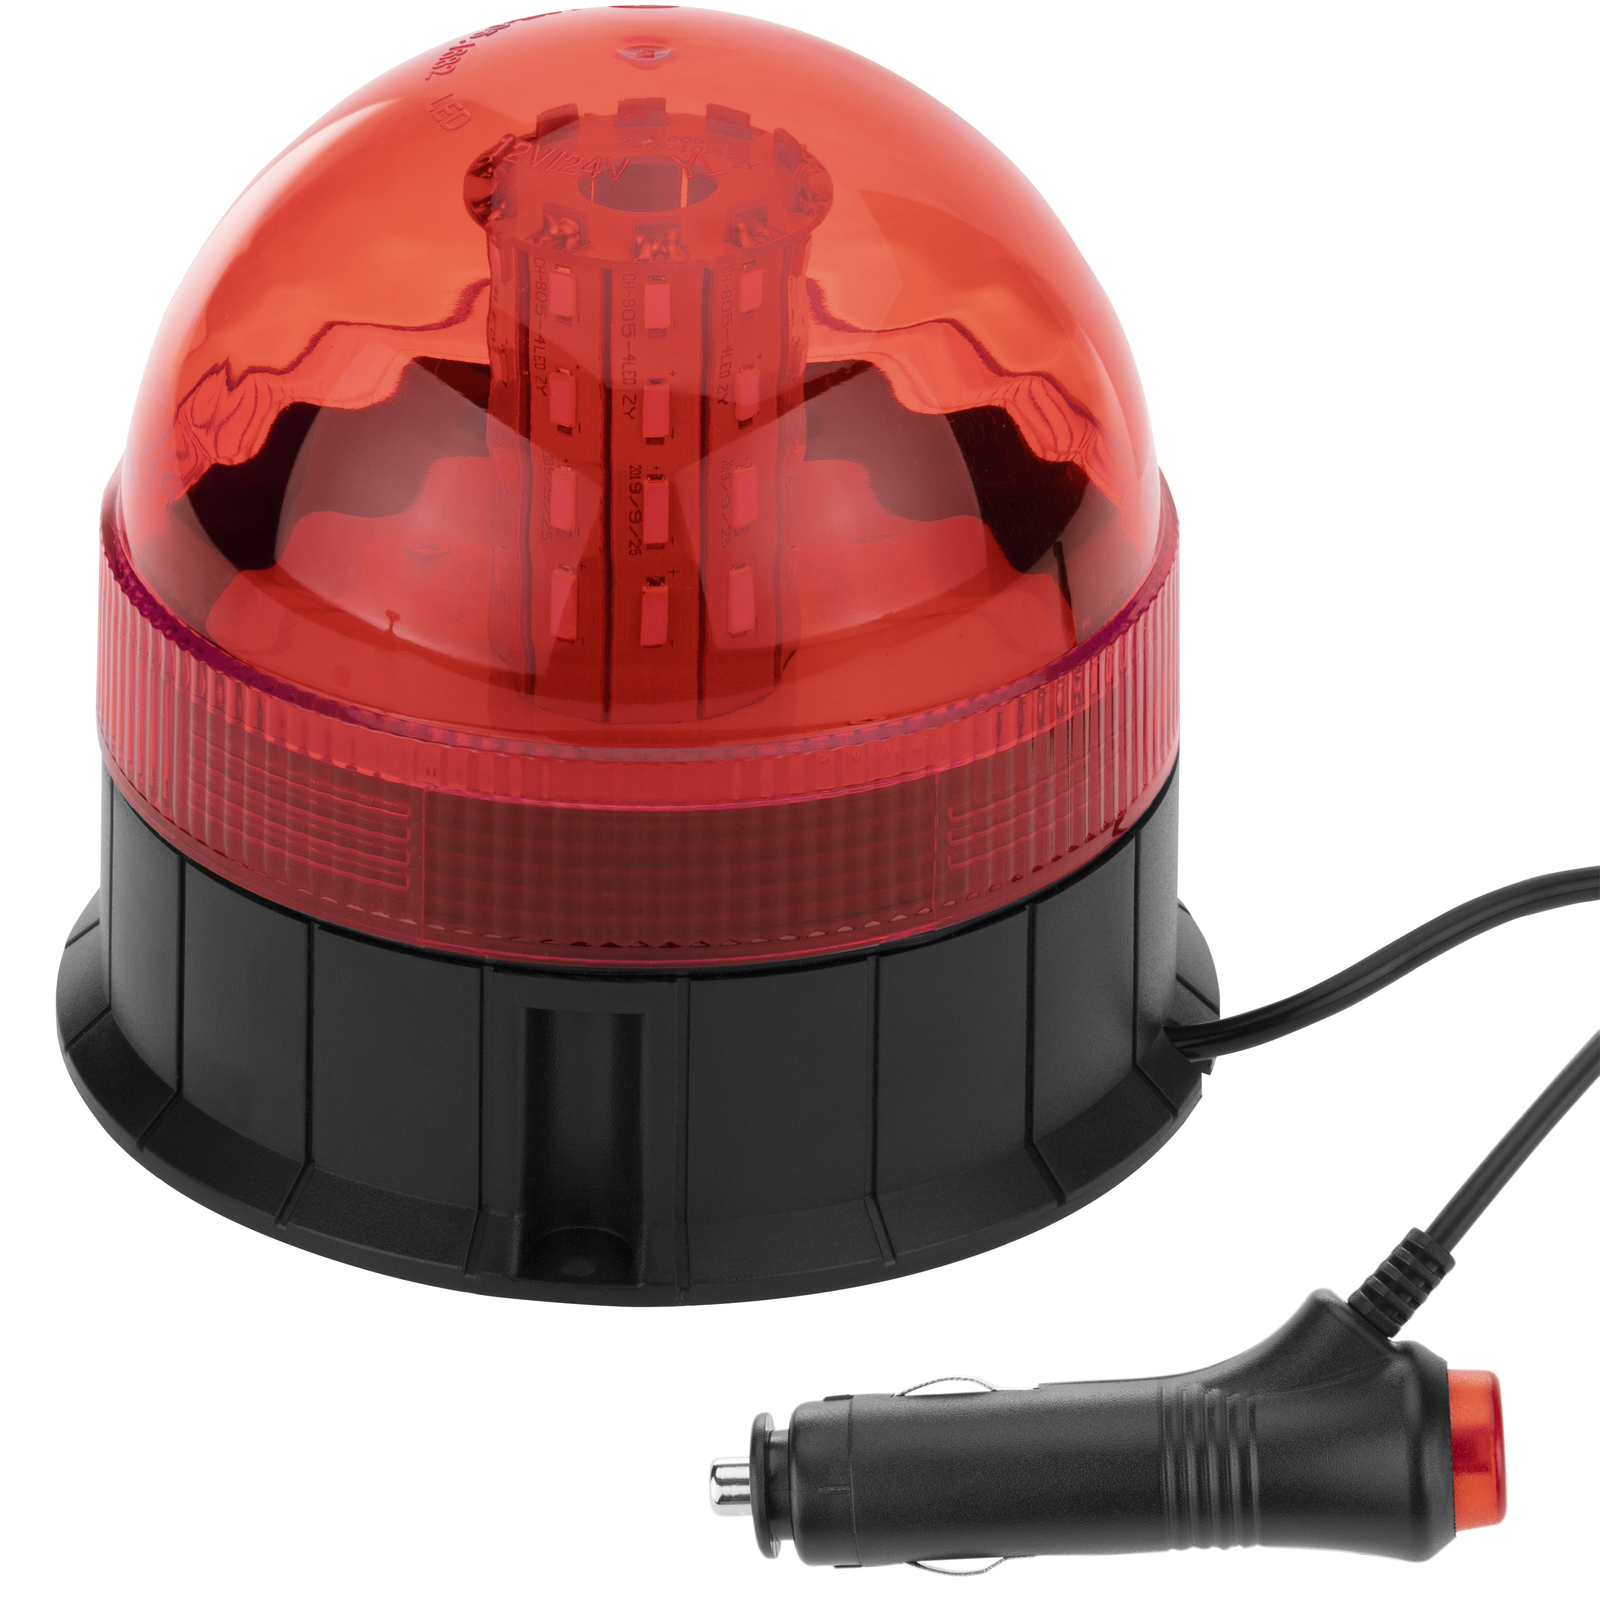 Gyrophare a led magnetique rechargeable - Cdiscount - Page 2